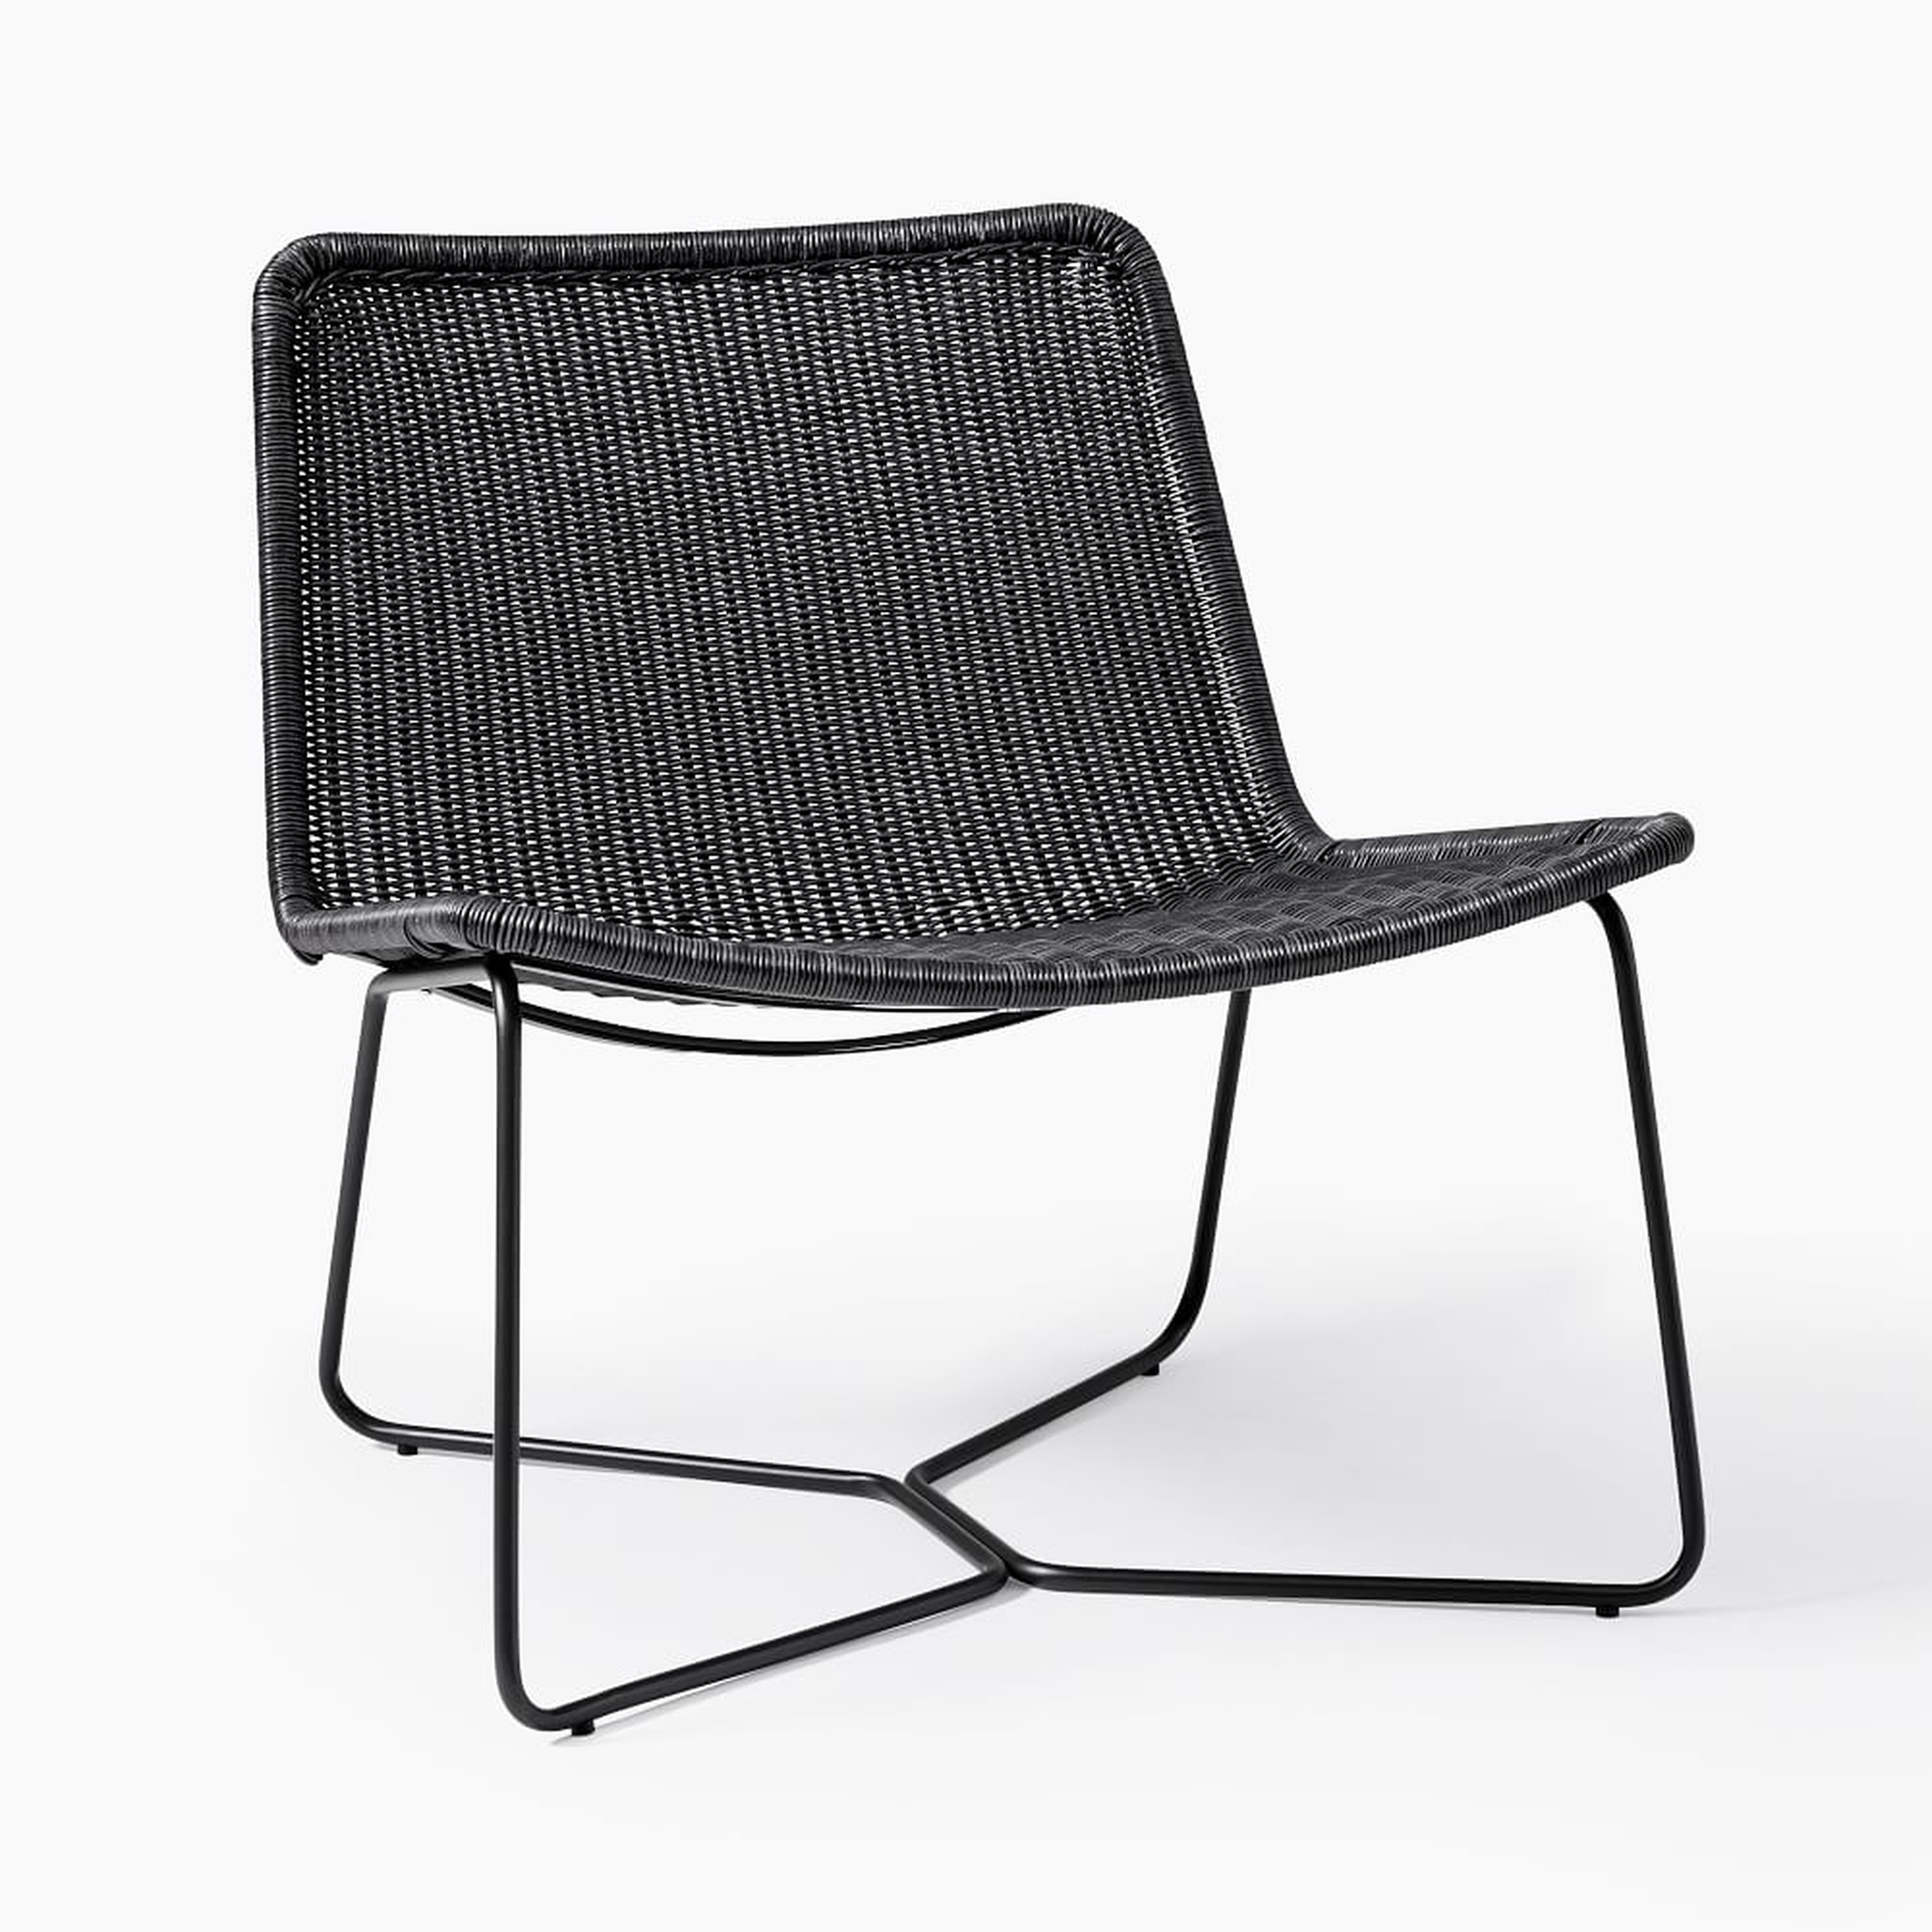 Slope Outdoor Lounge Chair, All Weather Wicker, Charcoal - West Elm